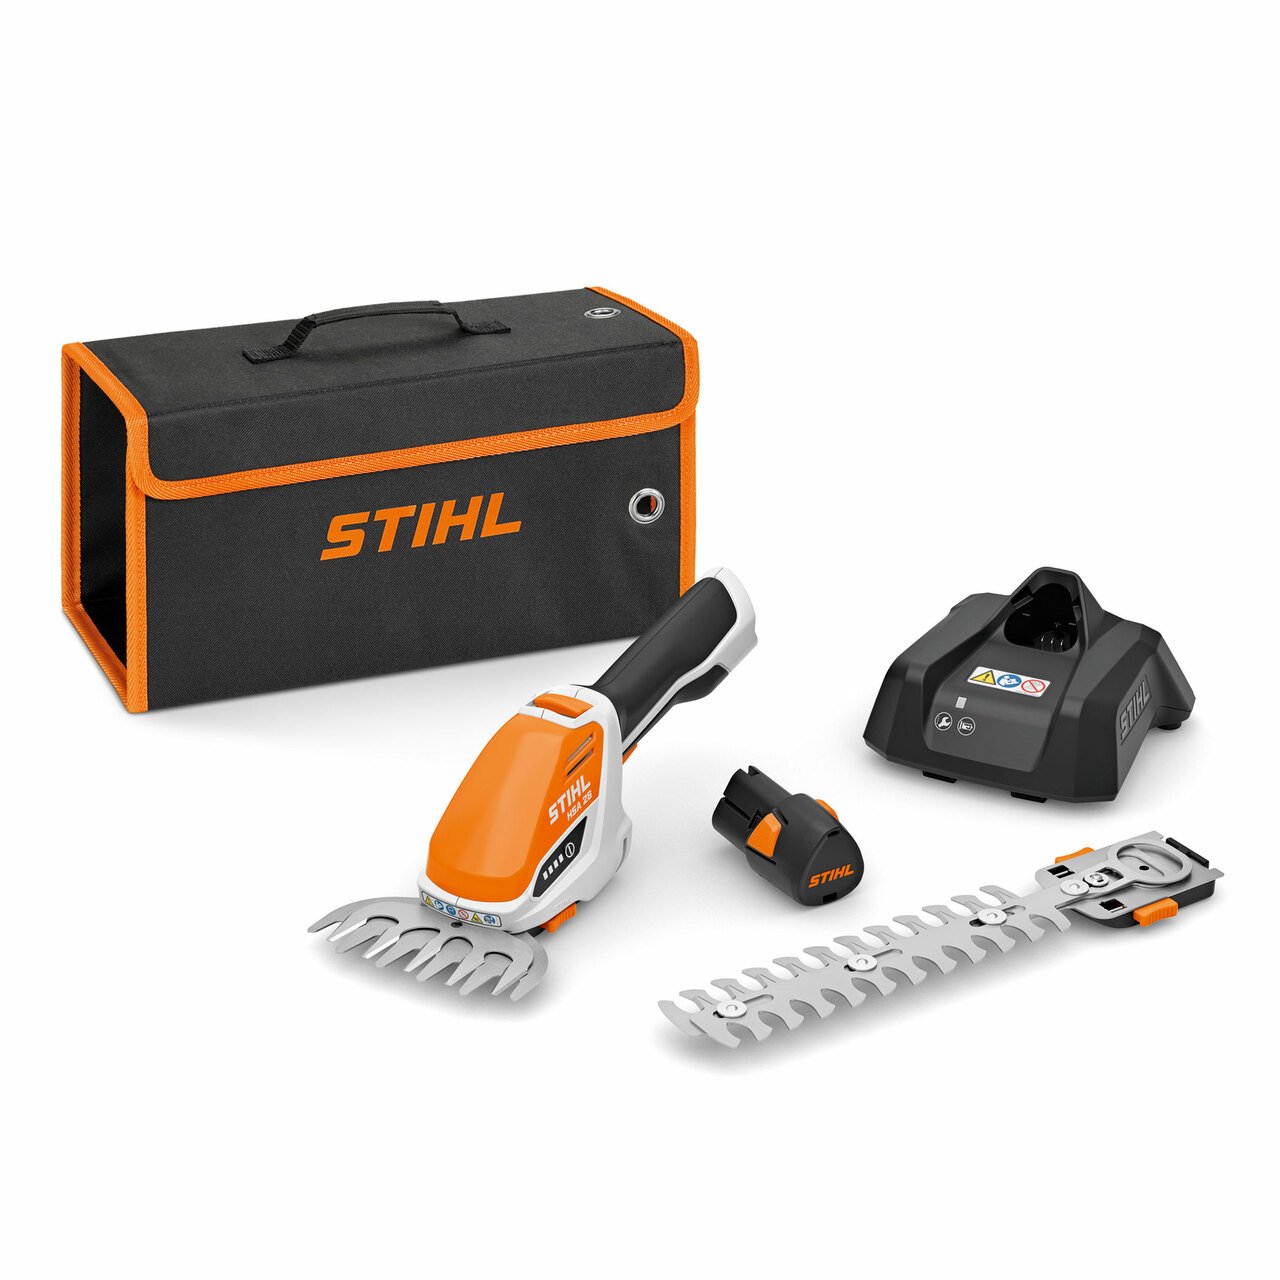 Image of Stihl <br><strong>HSA 26 10.8V Cordless Grass Shears (1 x 2.6Ah Battery)</strong>